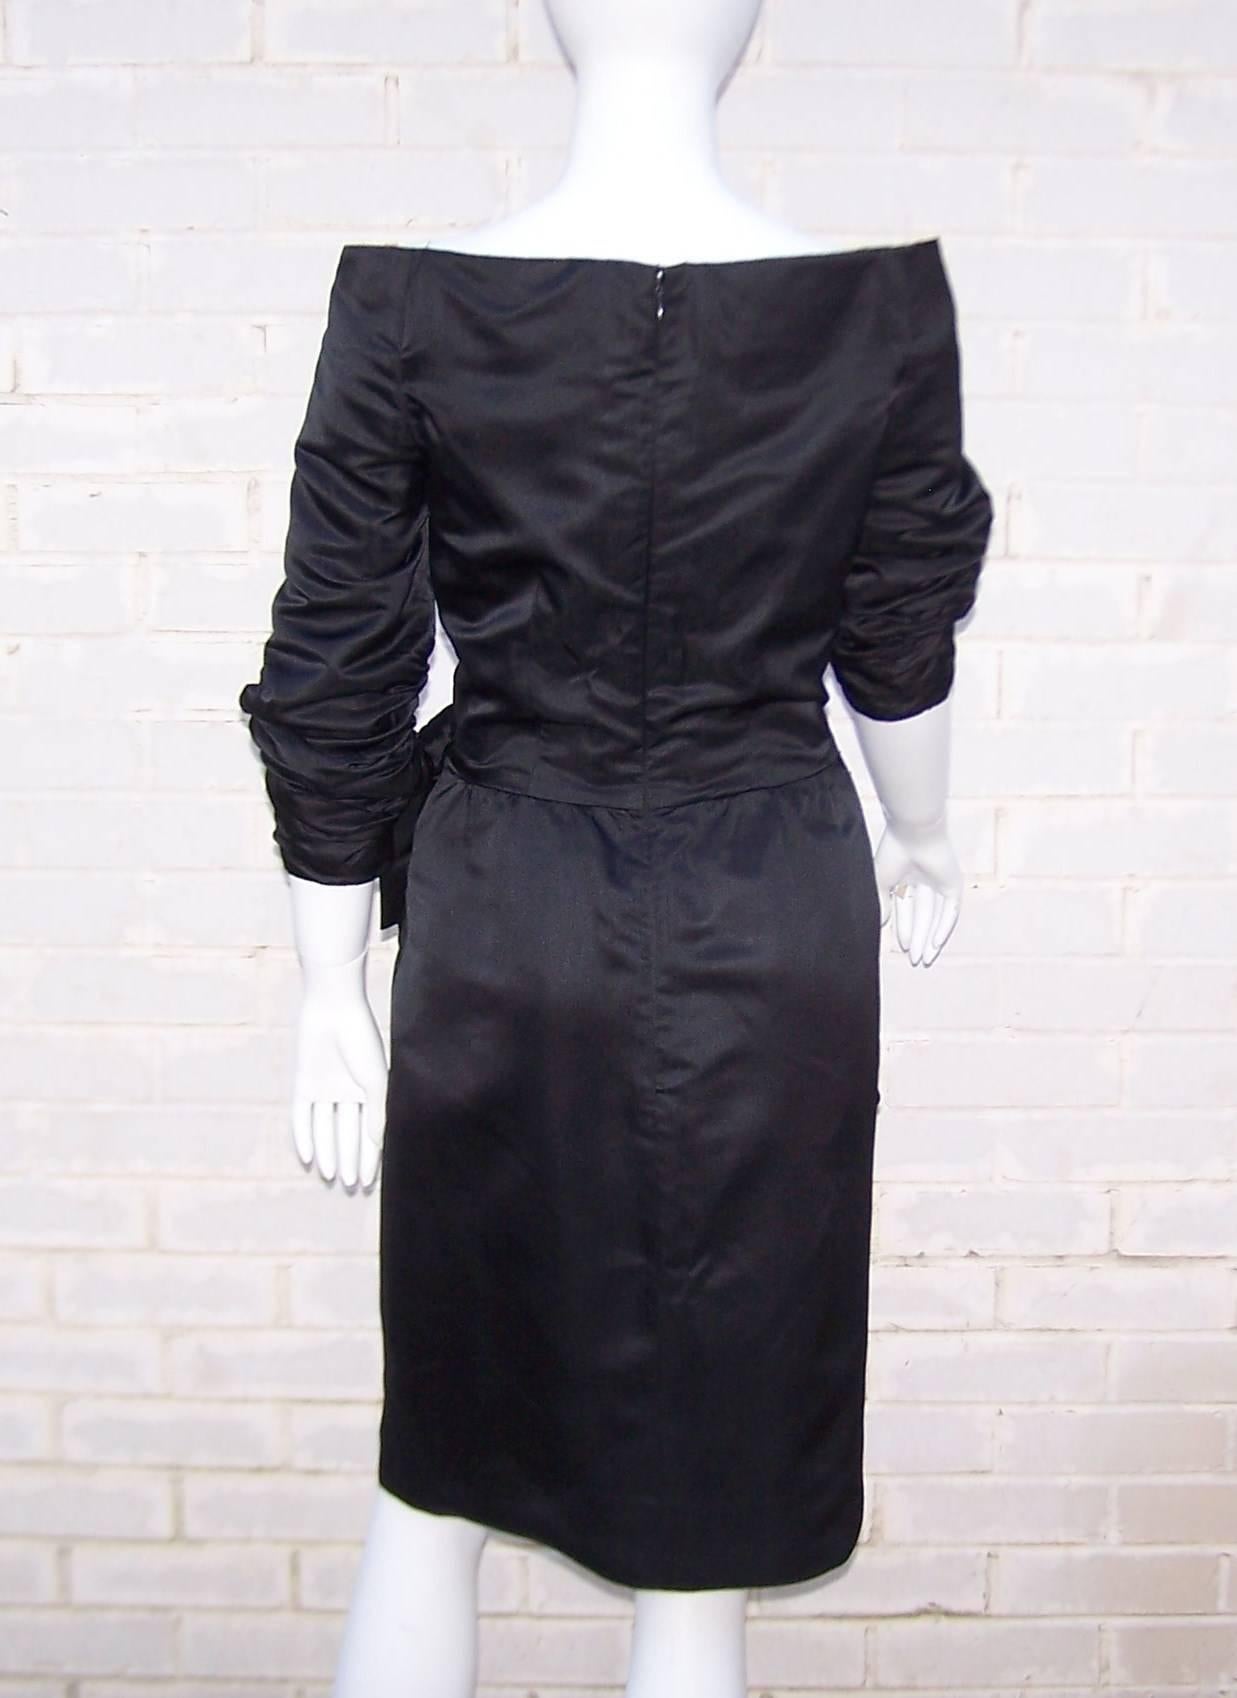 Women's Dramatic 1980's Scaasi Black Ruched Cocktail Dress